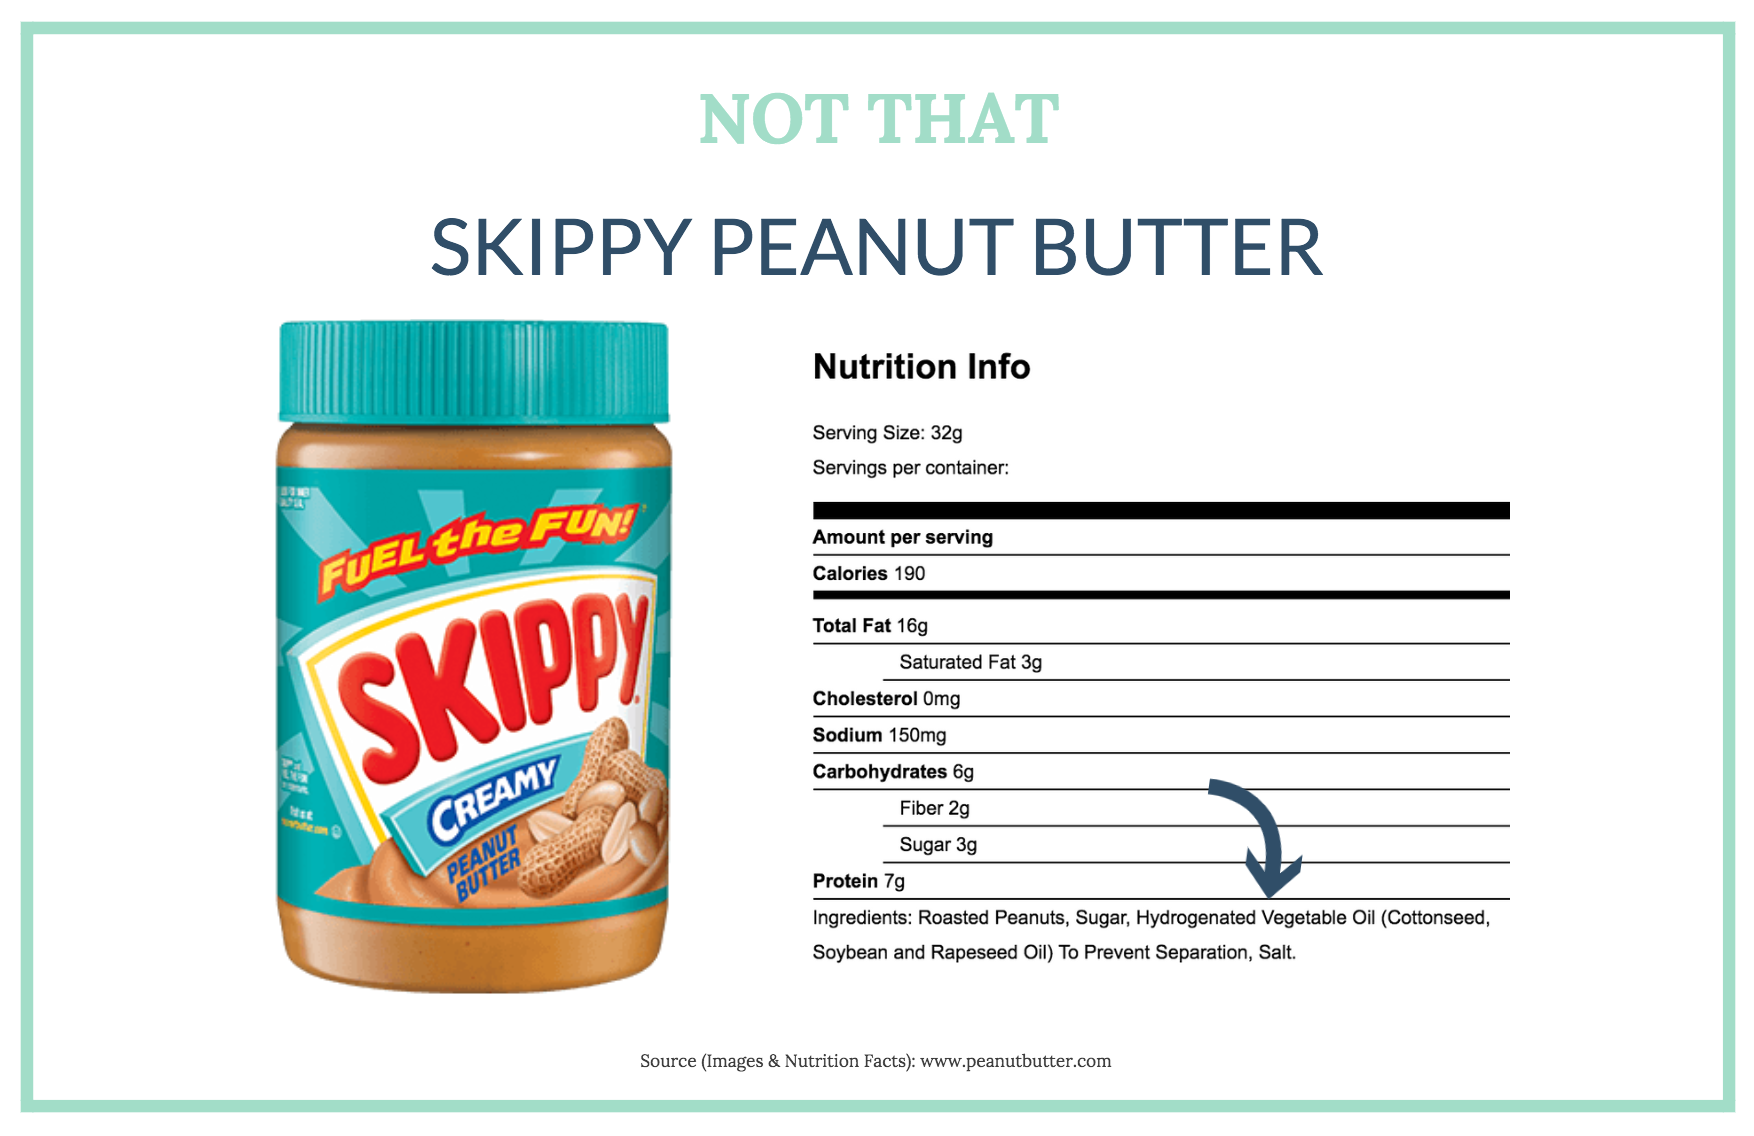 When possible, STEER clear of peanut butter that has added oil like skippy (notice they add sugar too)!